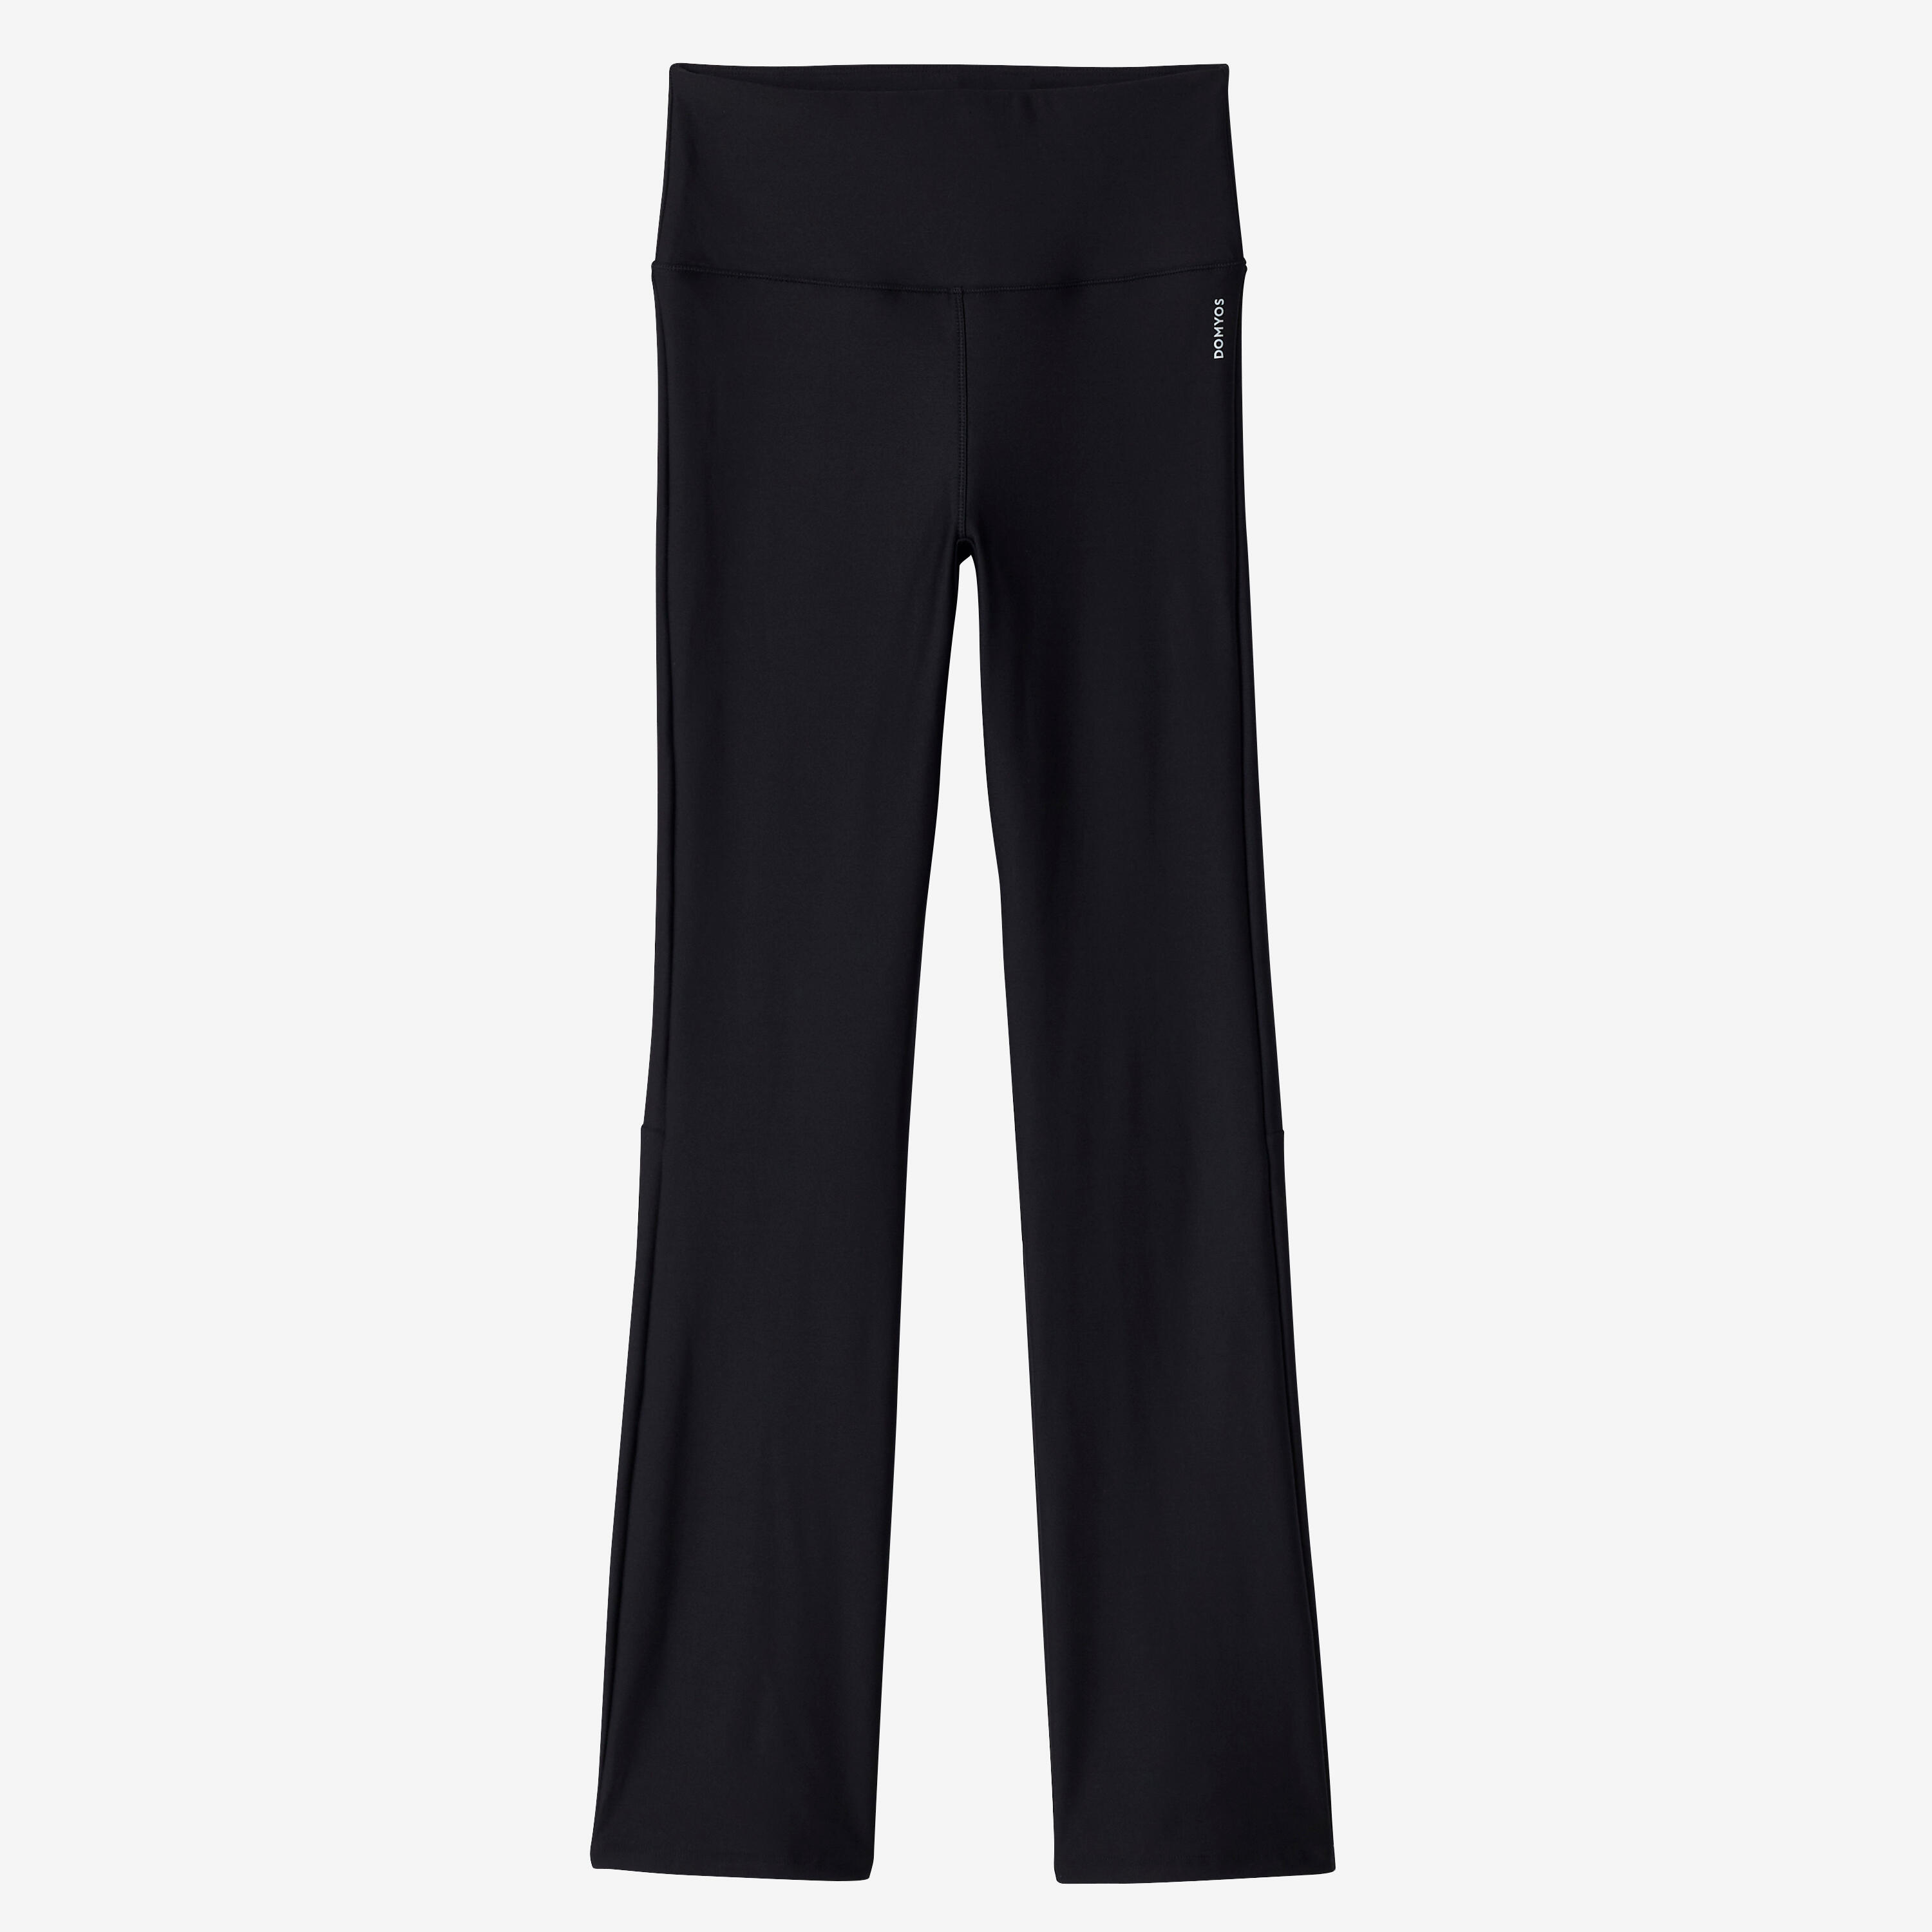 Decathlon Cotton Solid / Plain Gym / Sports Trackpant for Women | Udaan -  B2B Buying for Retailers